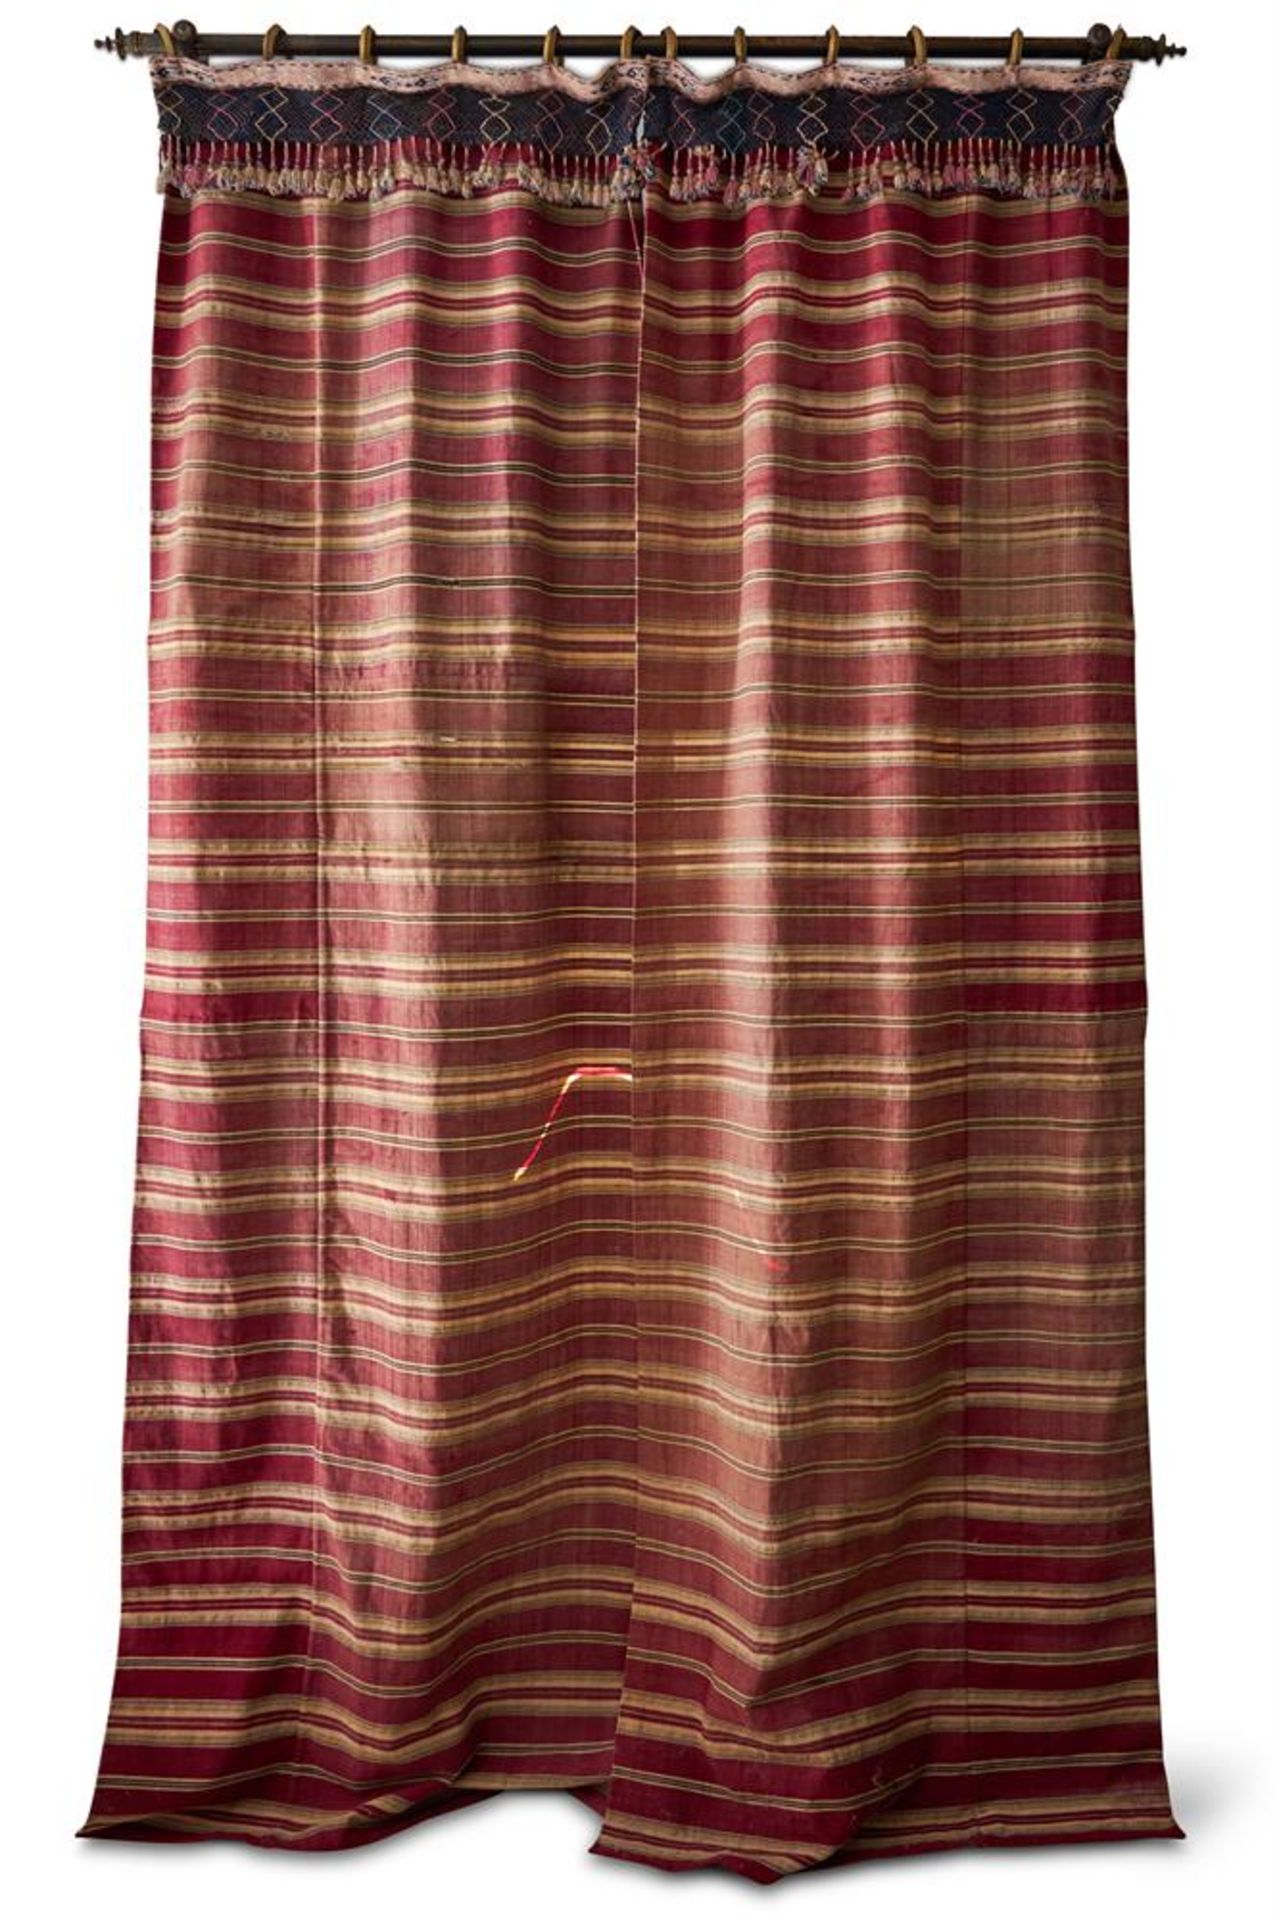 TWO PAIRS OF COTTON AND METALLIC THREAD WOVEN STRIPE CURTAINS, SYRIAN, 19TH CENTURY - Image 3 of 5